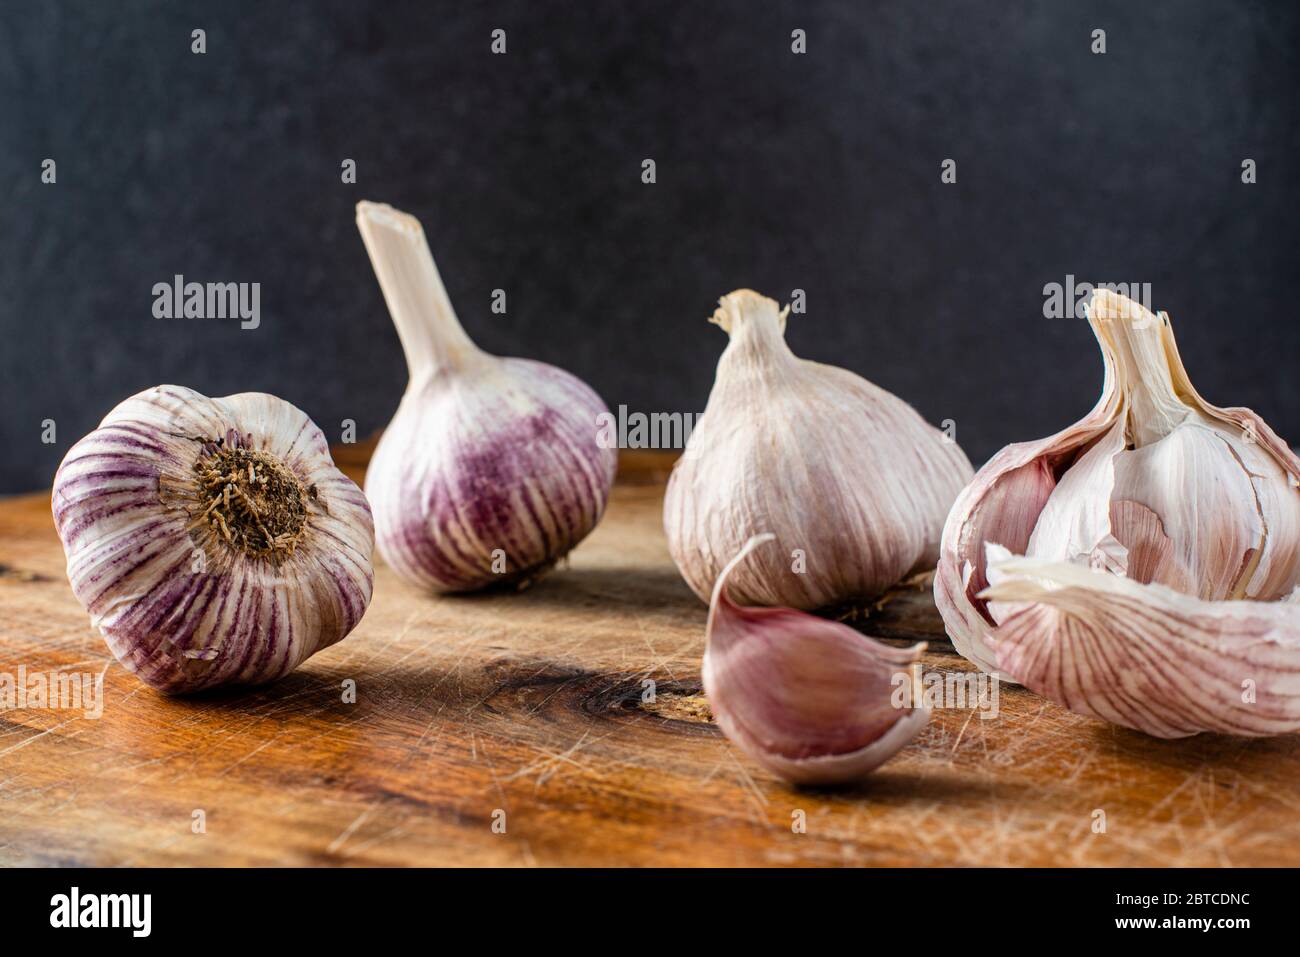 Whole garlic, Allium sativum, bulbs and cloves on wooden board with dark background and copy space Stock Photo